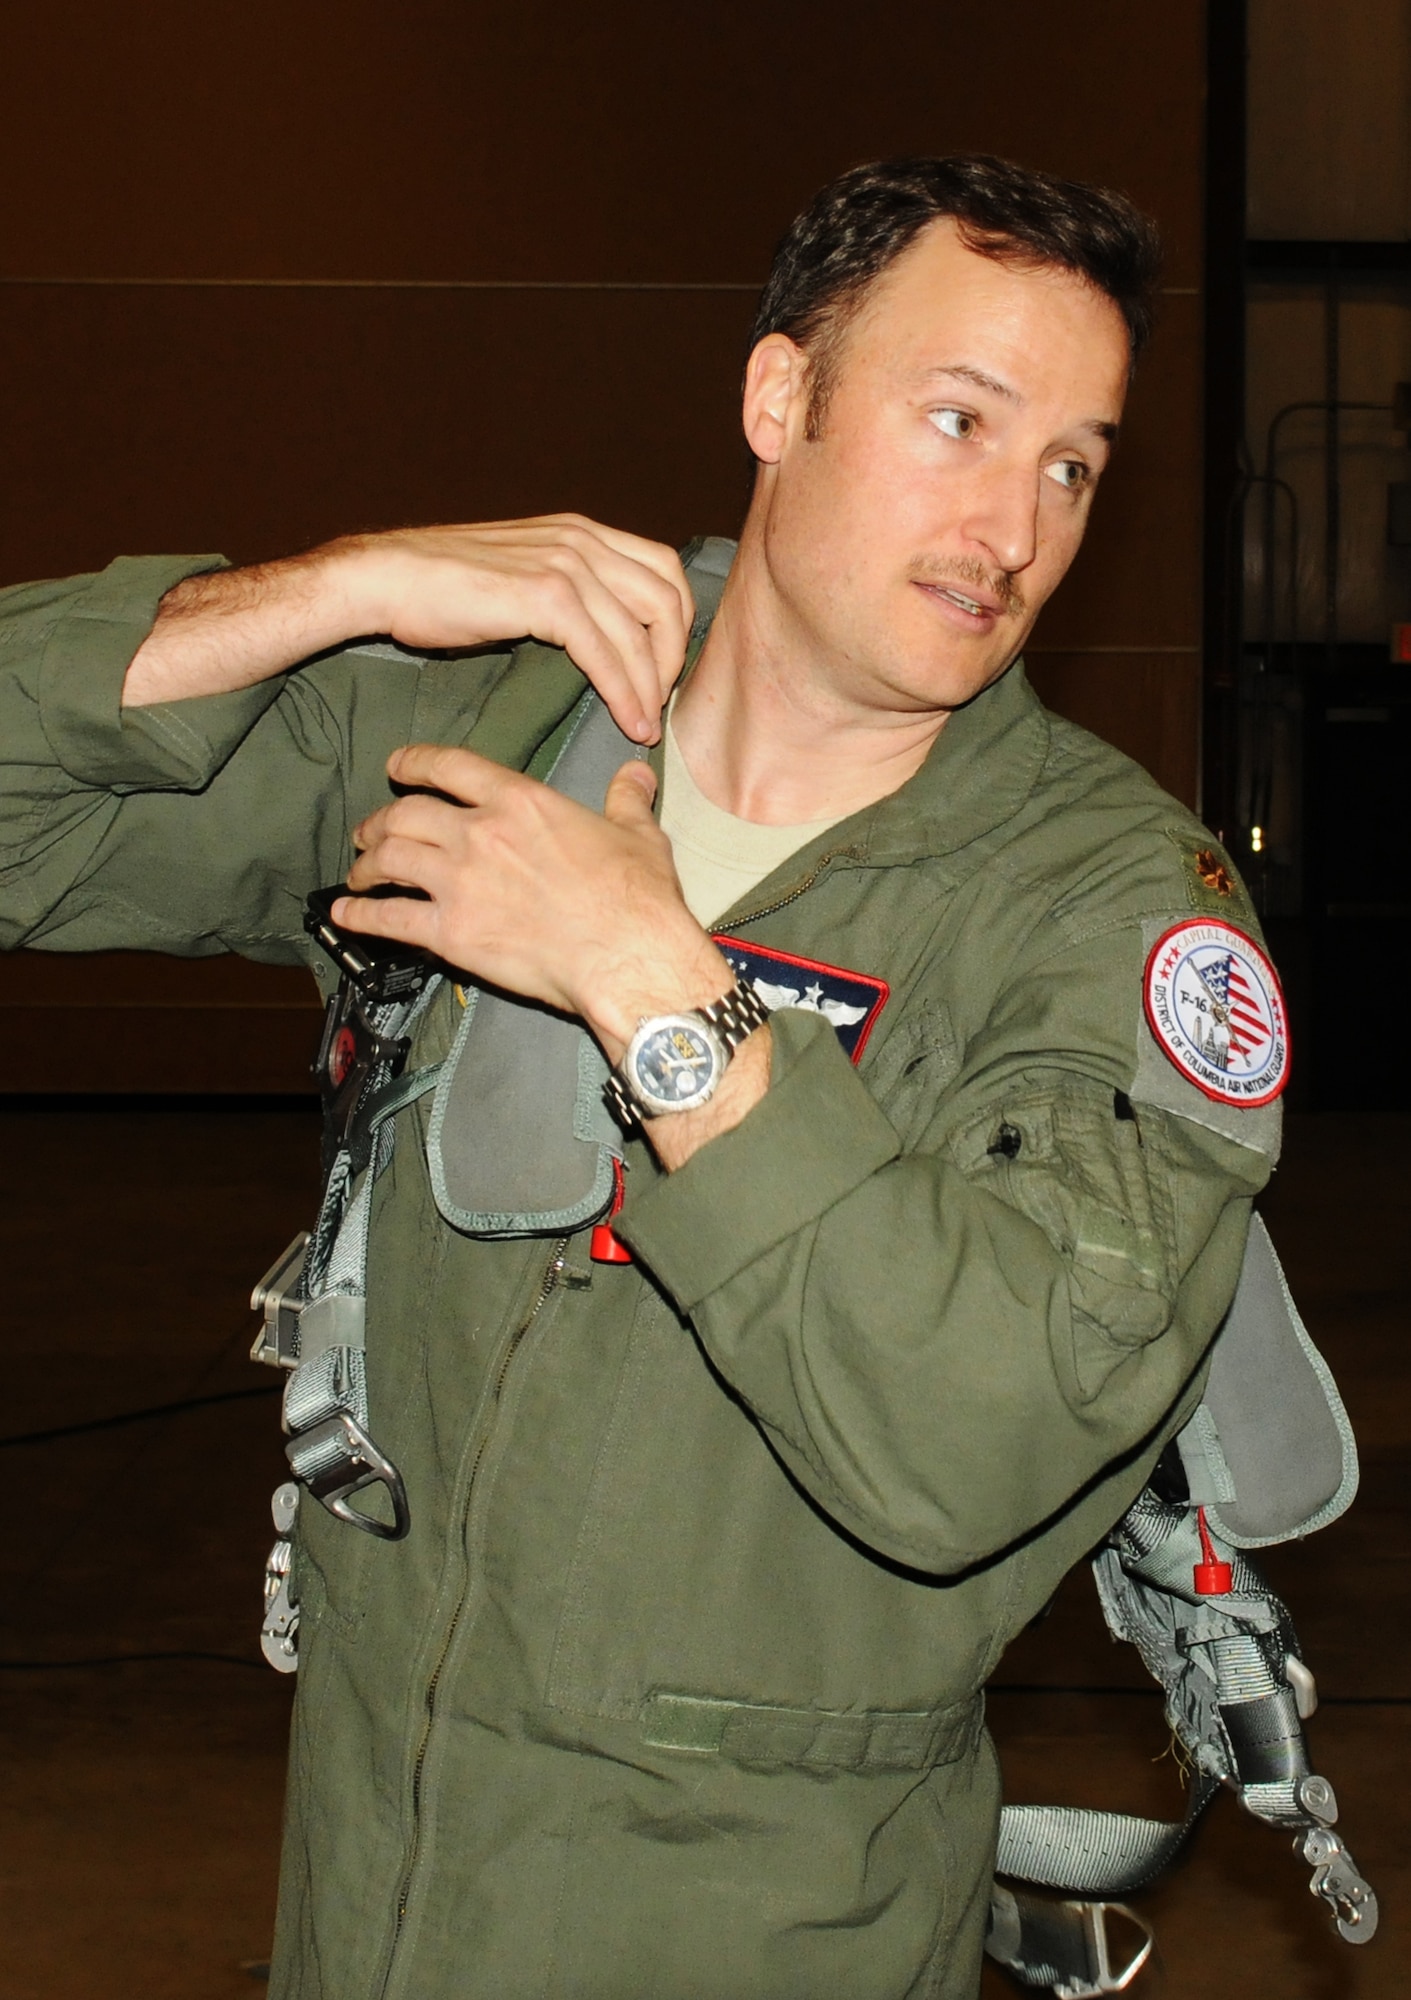 Pilot Maj. Wyck Furcron, with the 121st Fighter Squadron, sprints to the F-16 Fighting Falcon aircraft, quickly donning his flight equipment in response to a real-world red alarm scramble March 14. The 113th Wing’s Aerospace Control Alert Detachment reached a milestone of responding to 5,000 alert events on March 21. The alert unit was created in response to the 9/11 terrorist attacks on the United States on Sept. 11, 2001. (Air National Guard photo by Master Sgt. Becky Vanshur)